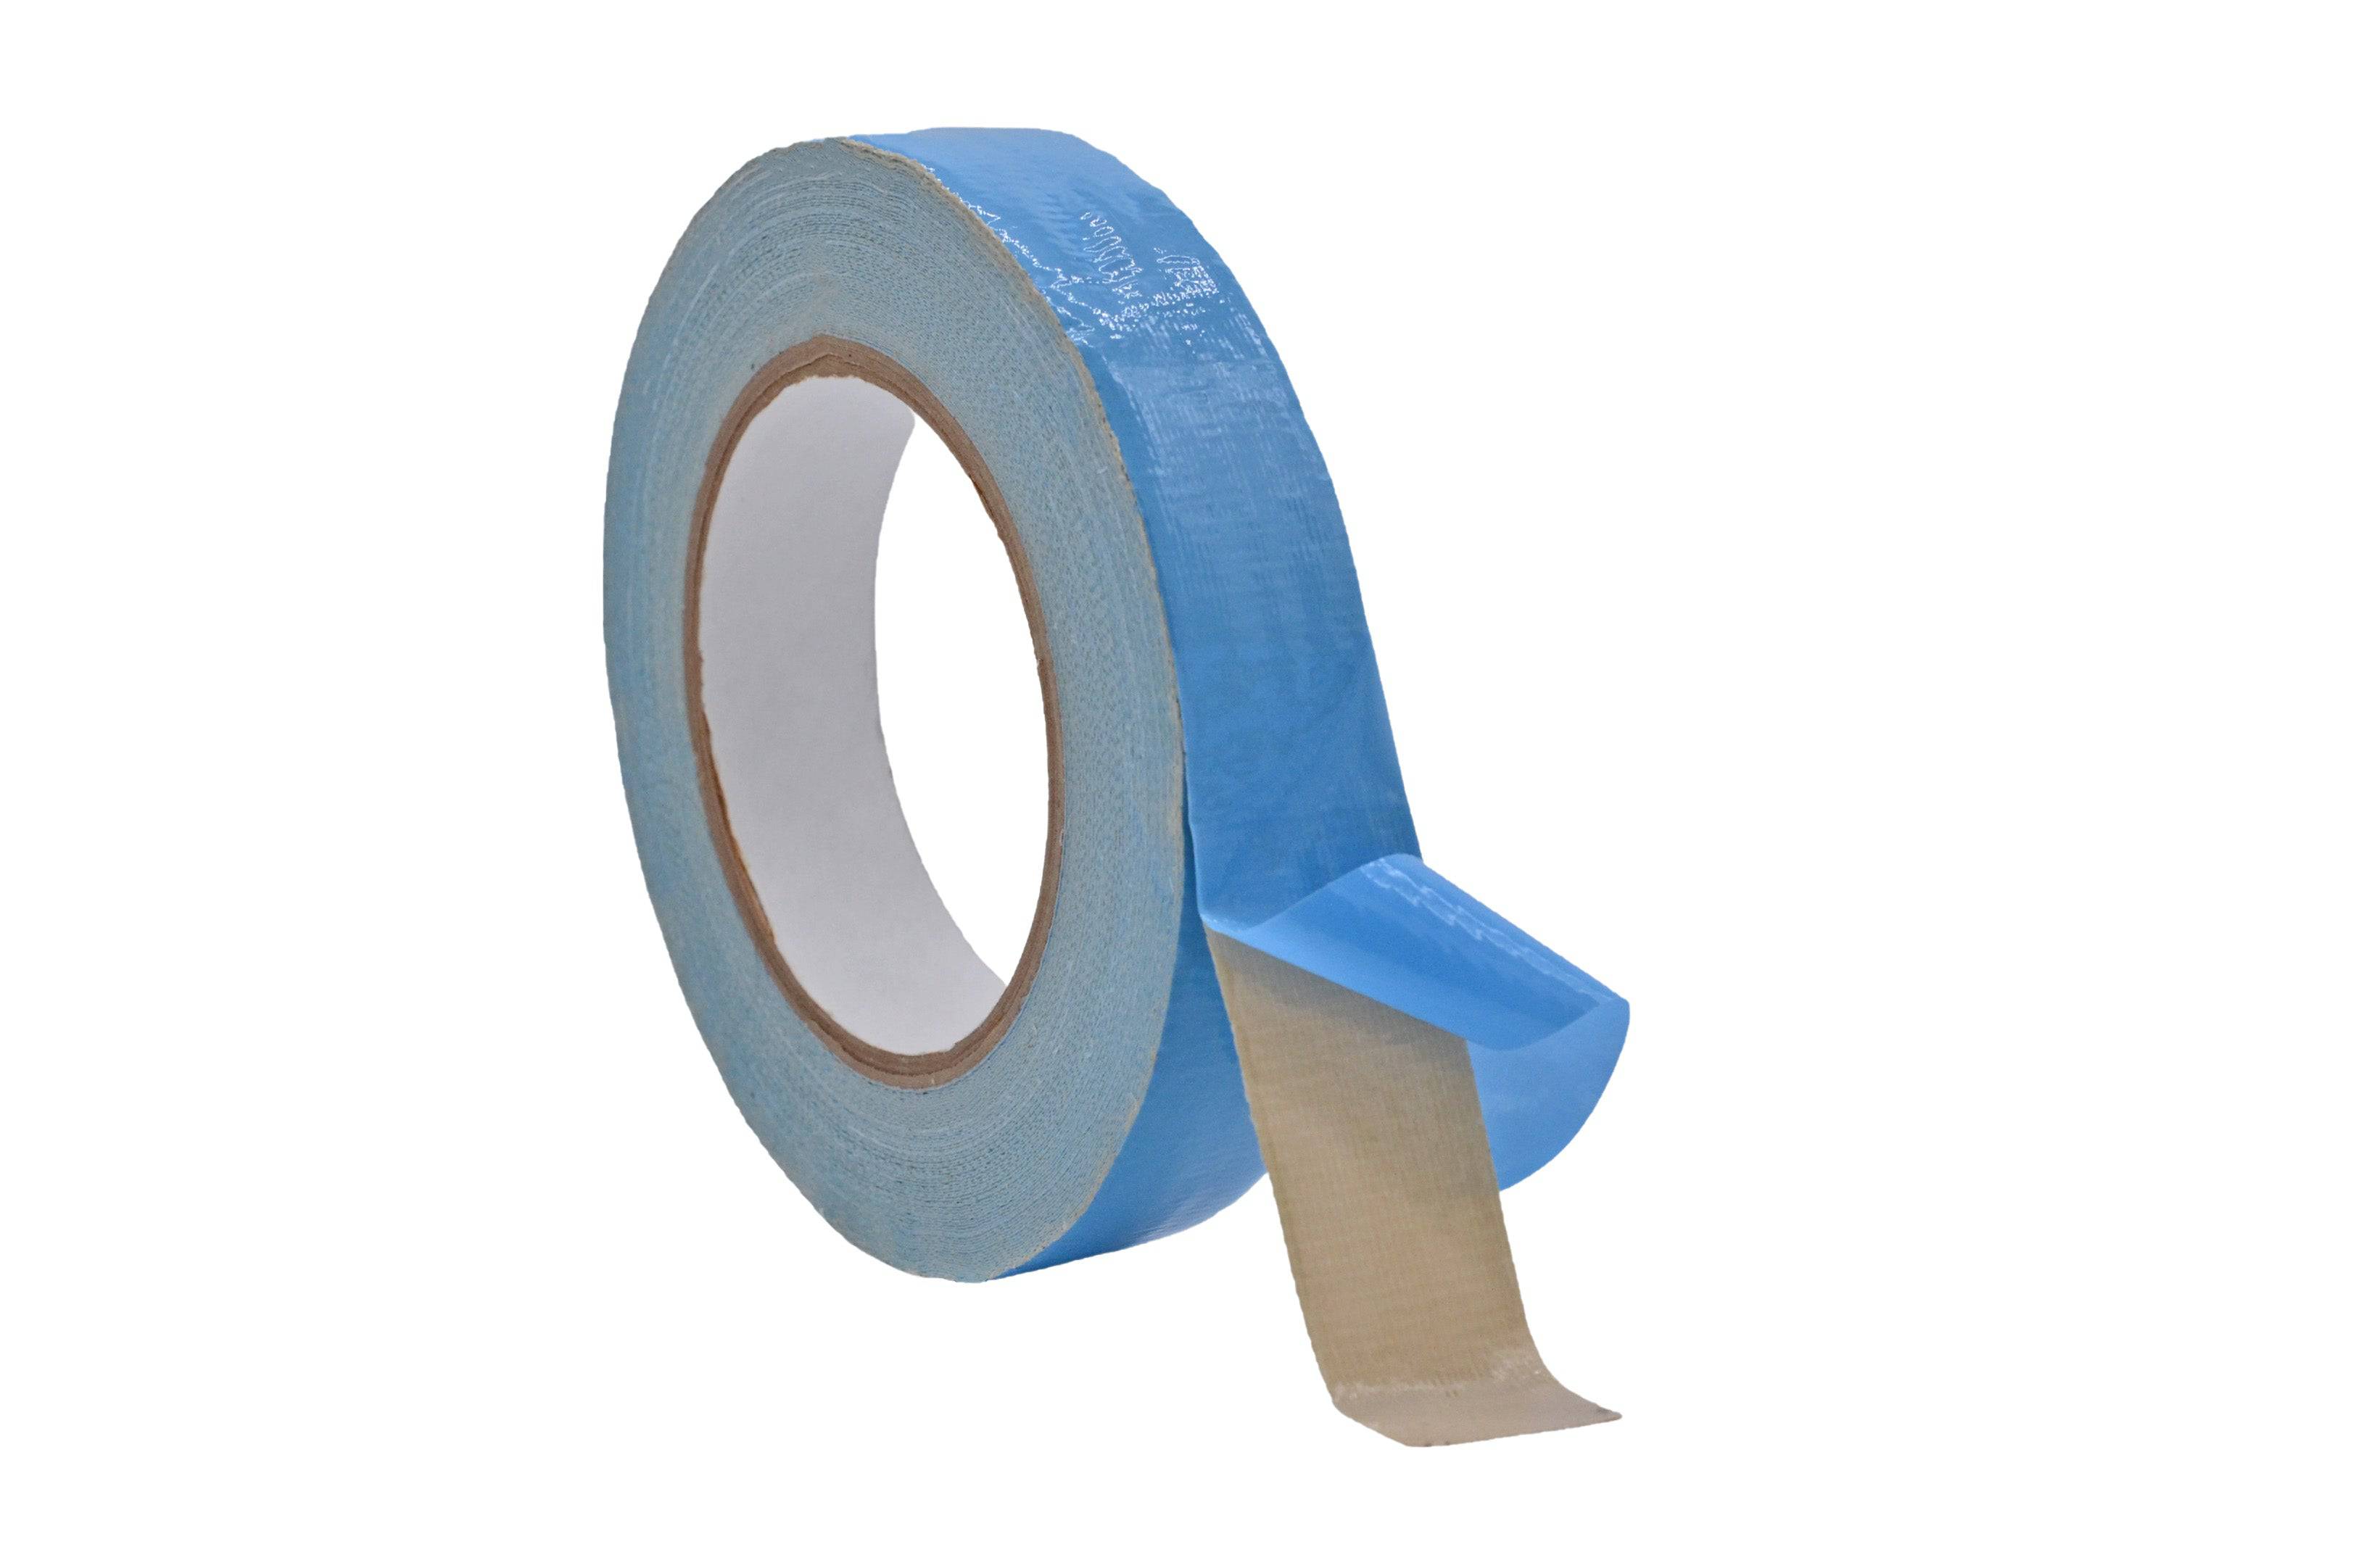 Double-Coated Cloth Carpet Tape 2 x 36 yd - Monkey Wrench Productions Store